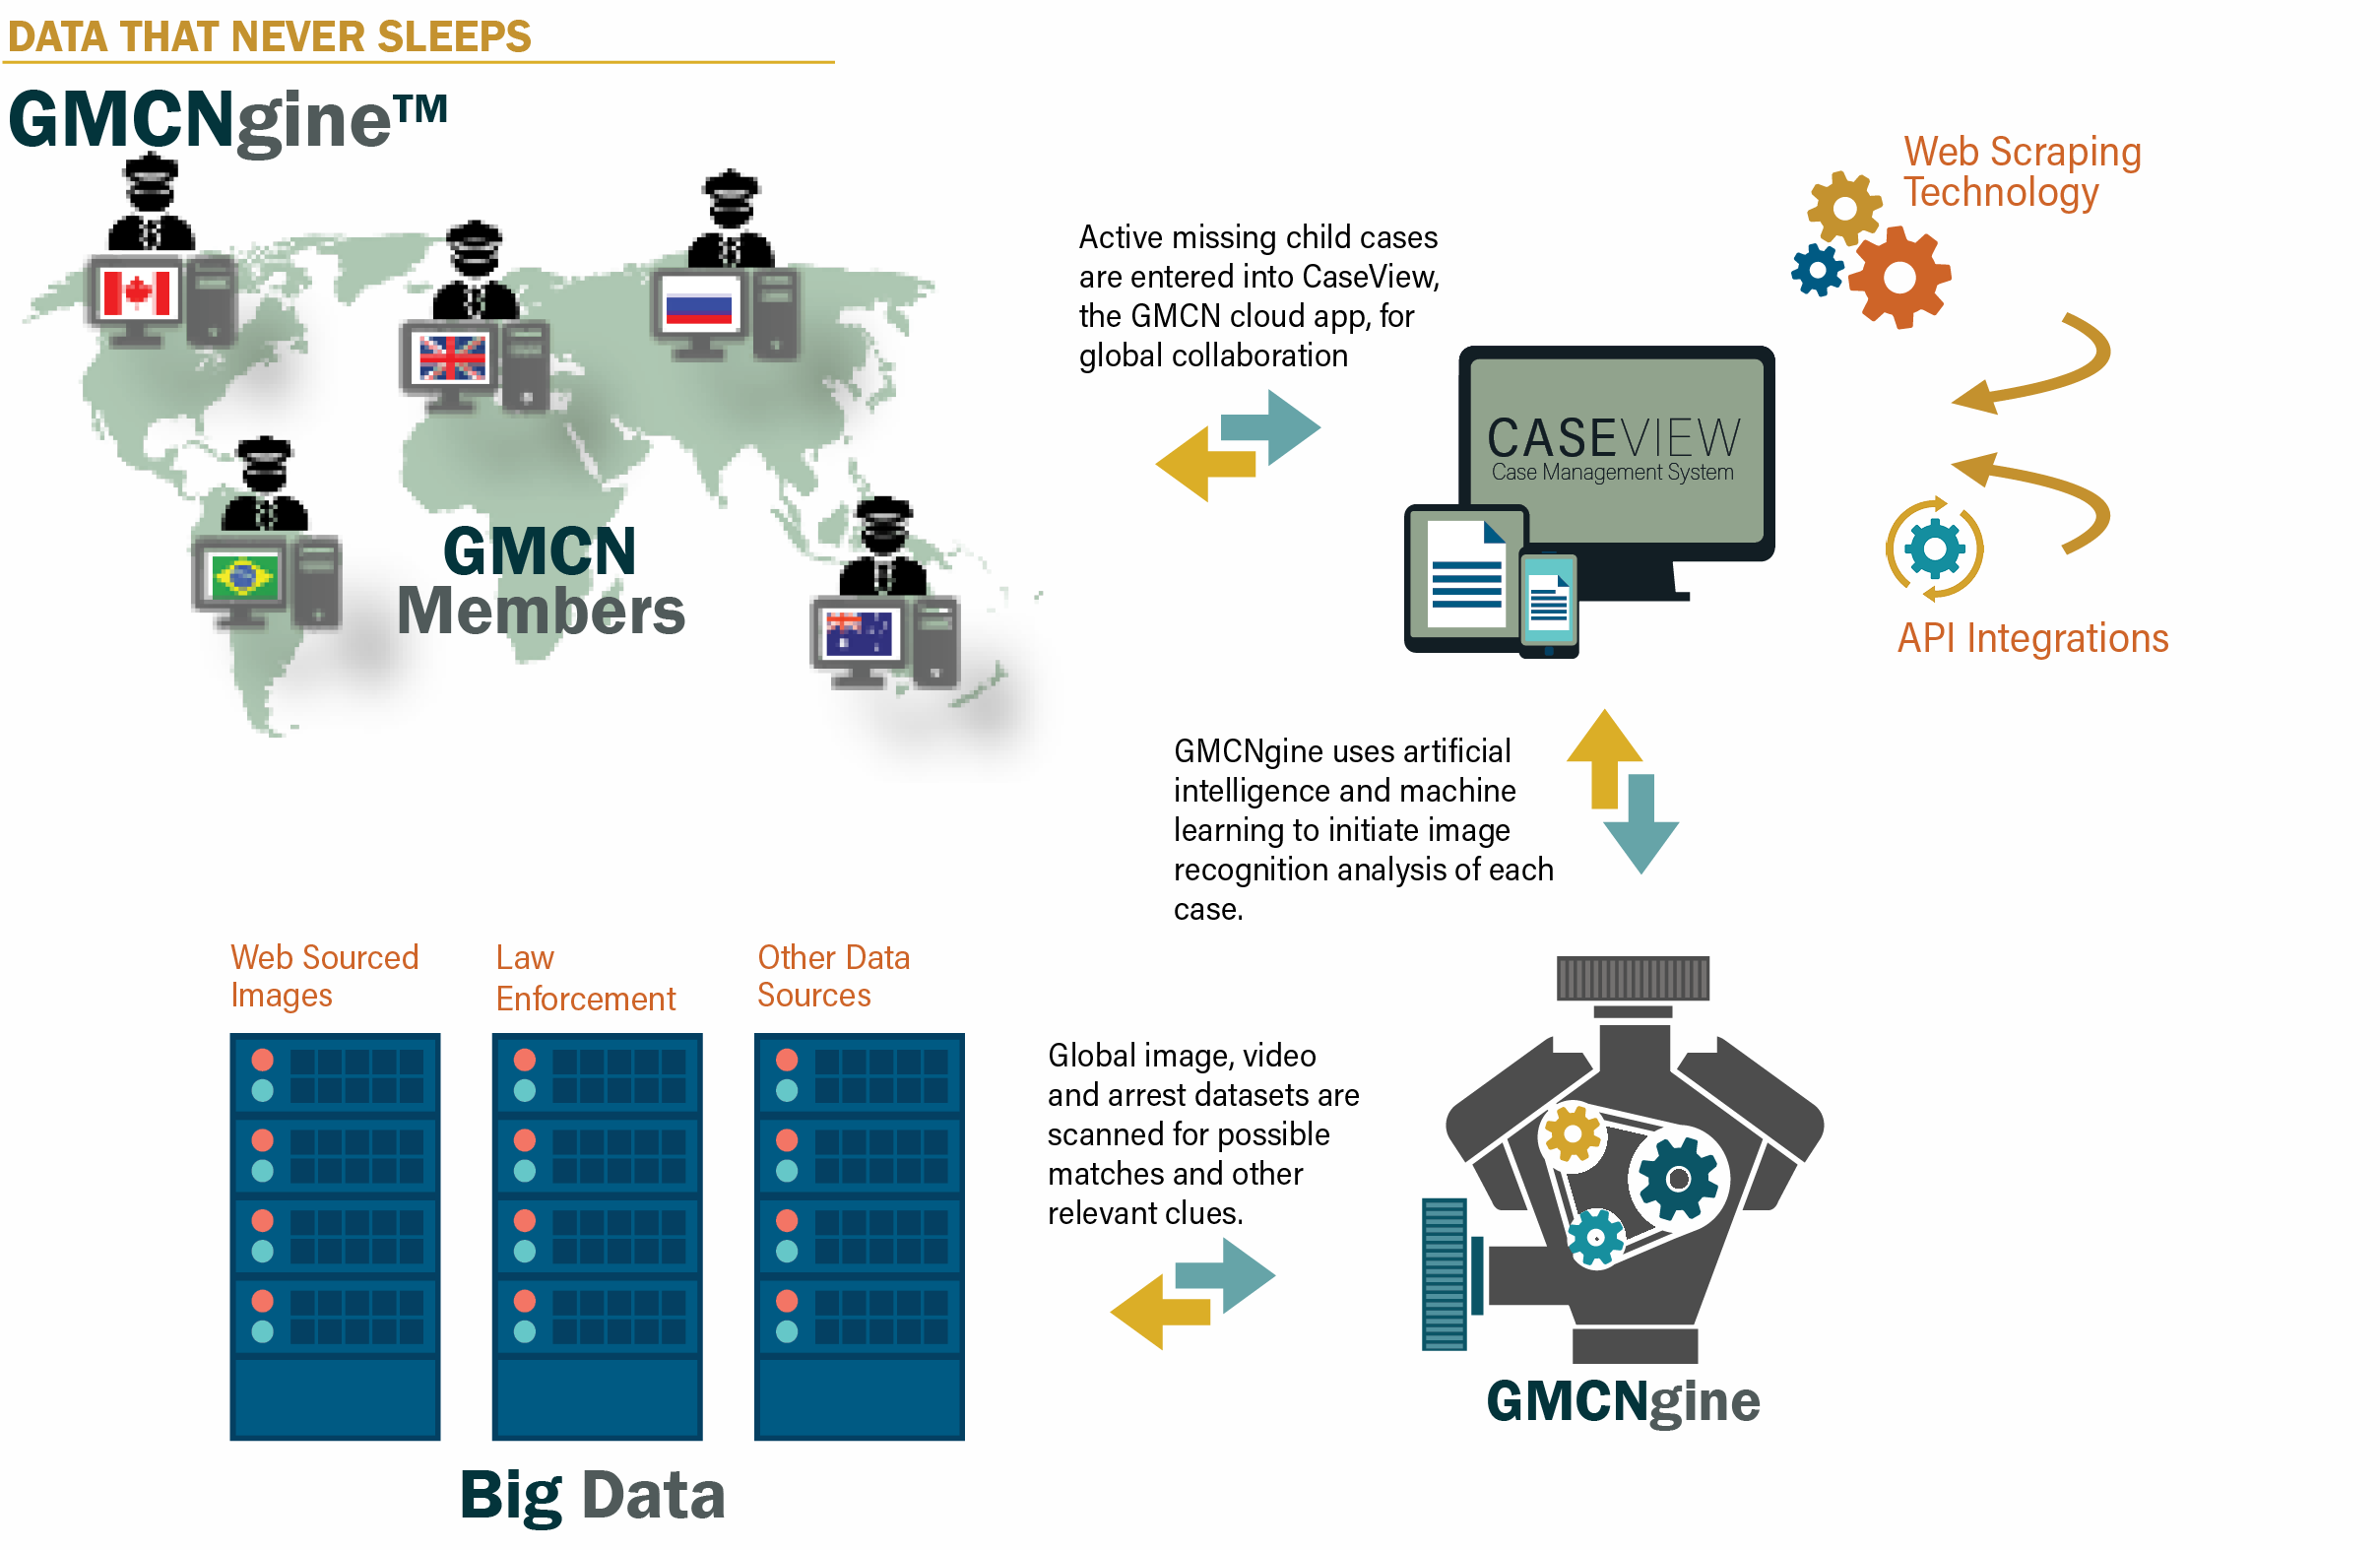 A representation of the Global Missing Children's Network upcoming anti-abduction platform, the GMCNgine, and how the GMCNgine will function, courtesy ICMEC and the Global Missing Children’s Center. The GMCNgine is an innovative new image-based search and matching platform, which will use machine learning, facial recognition and access to multi-jurisdictional criminal databases to scour the surface web and the dark web for leads on missing children and their abductors. It will be accessible to law enforcement and other first responder members of the GMCN. 